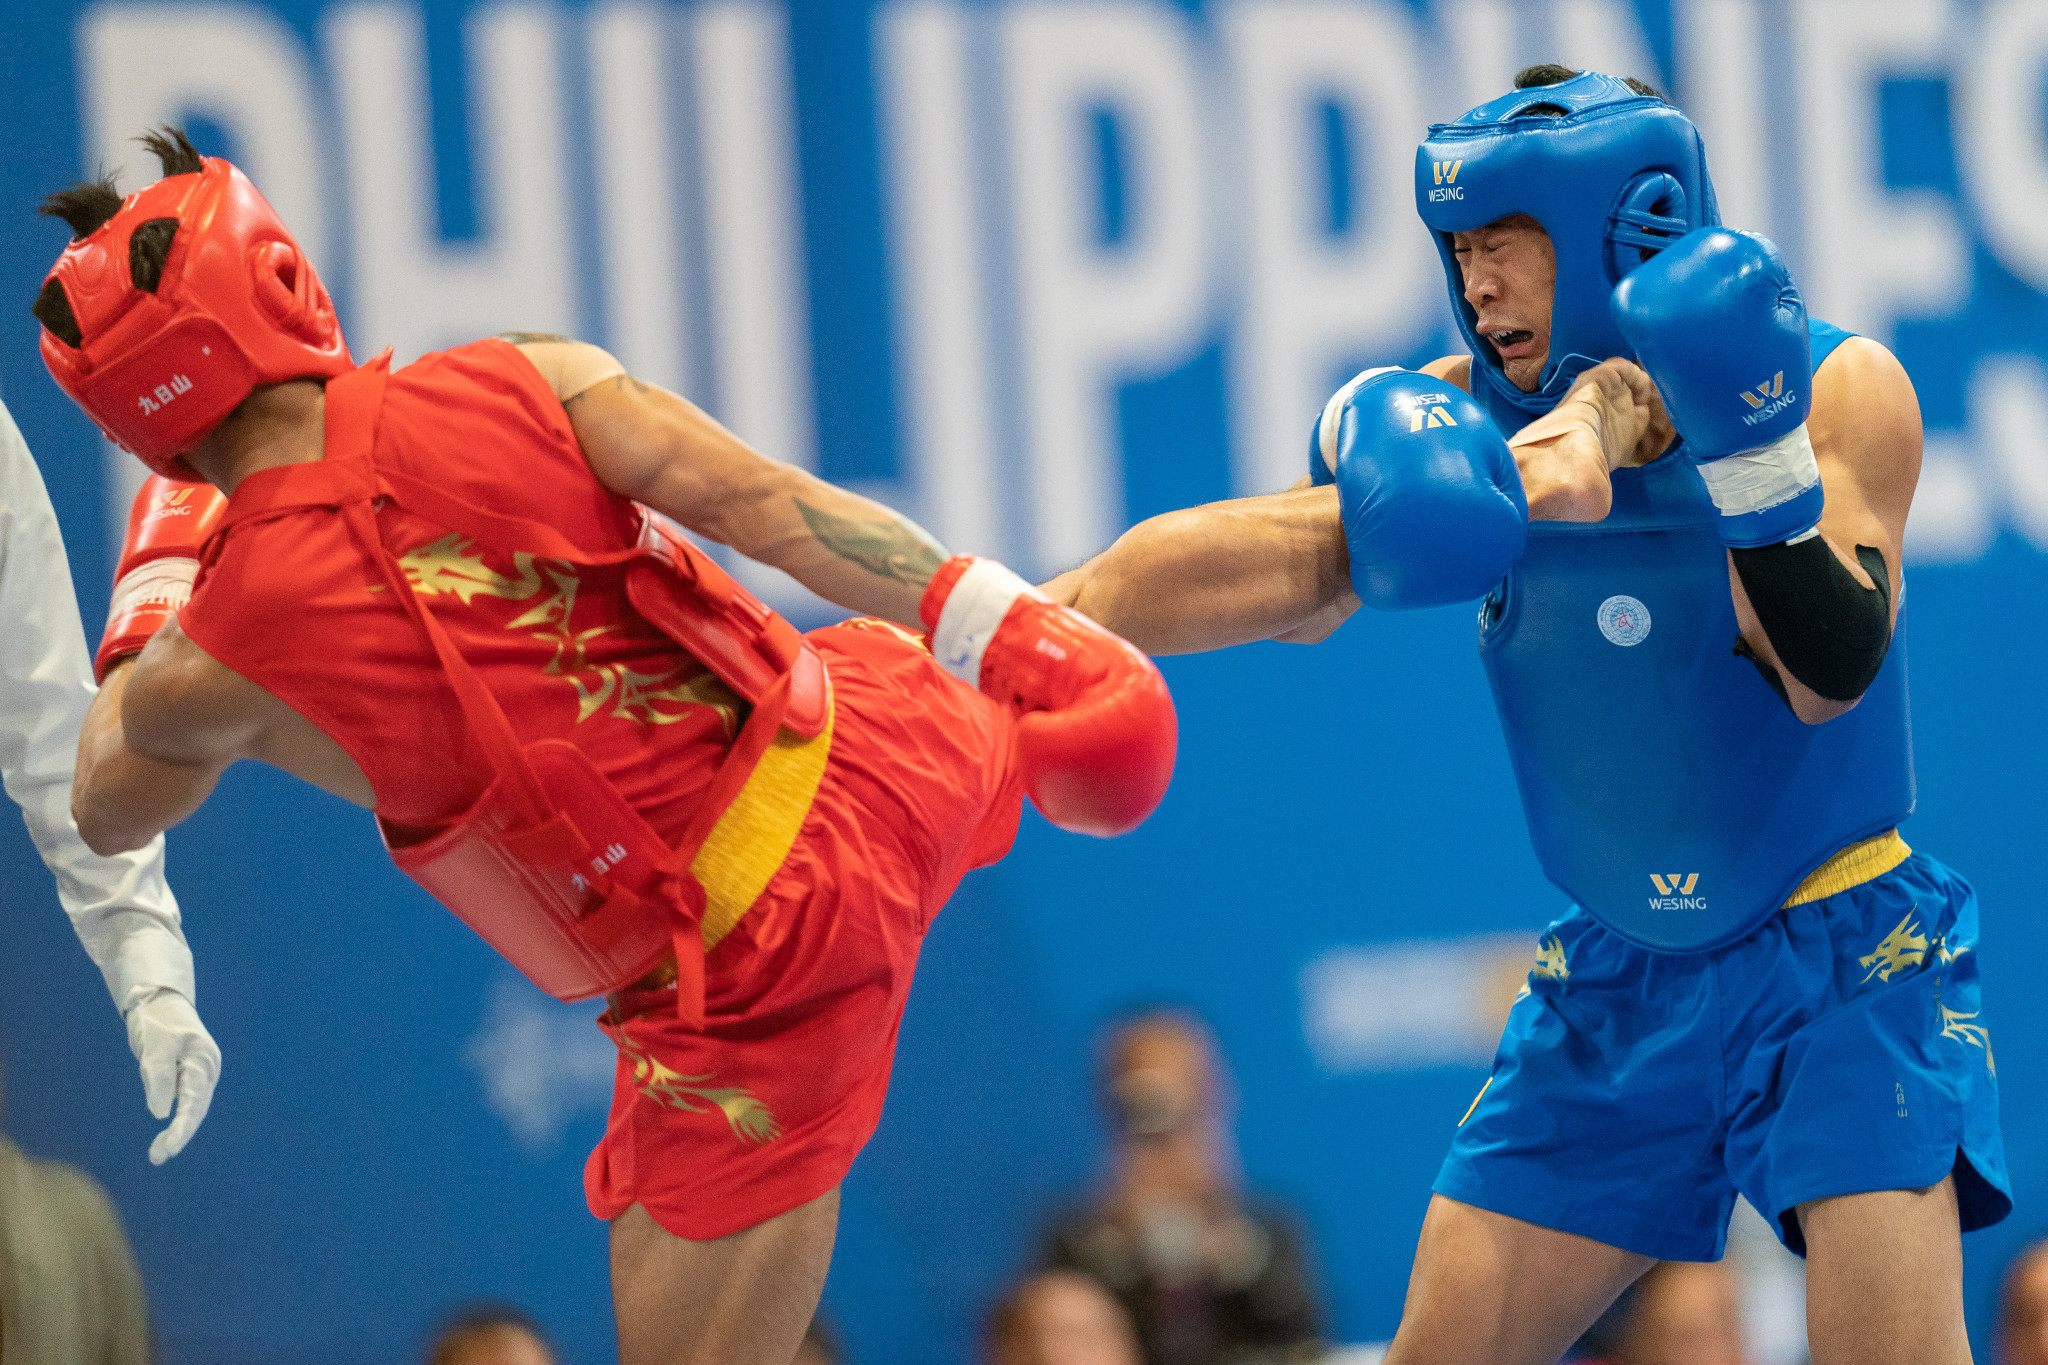 Wushu's addition to the sport programme was also approved by the IOC Executive Board ©Getty Images